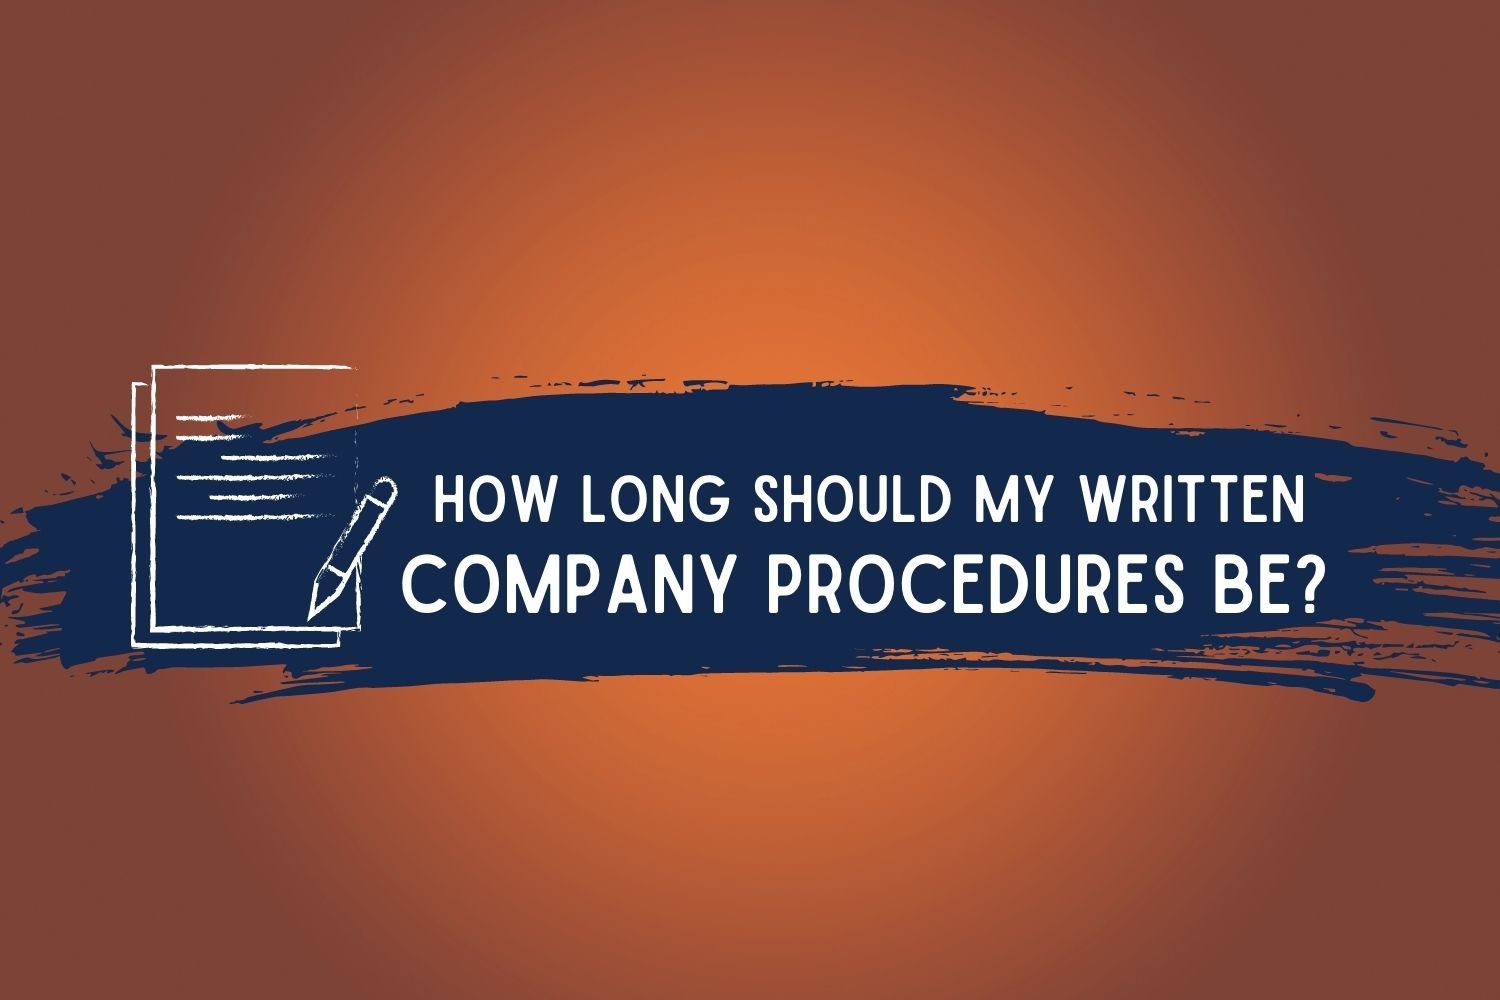 How Long Should My Written Company Procedures Be?